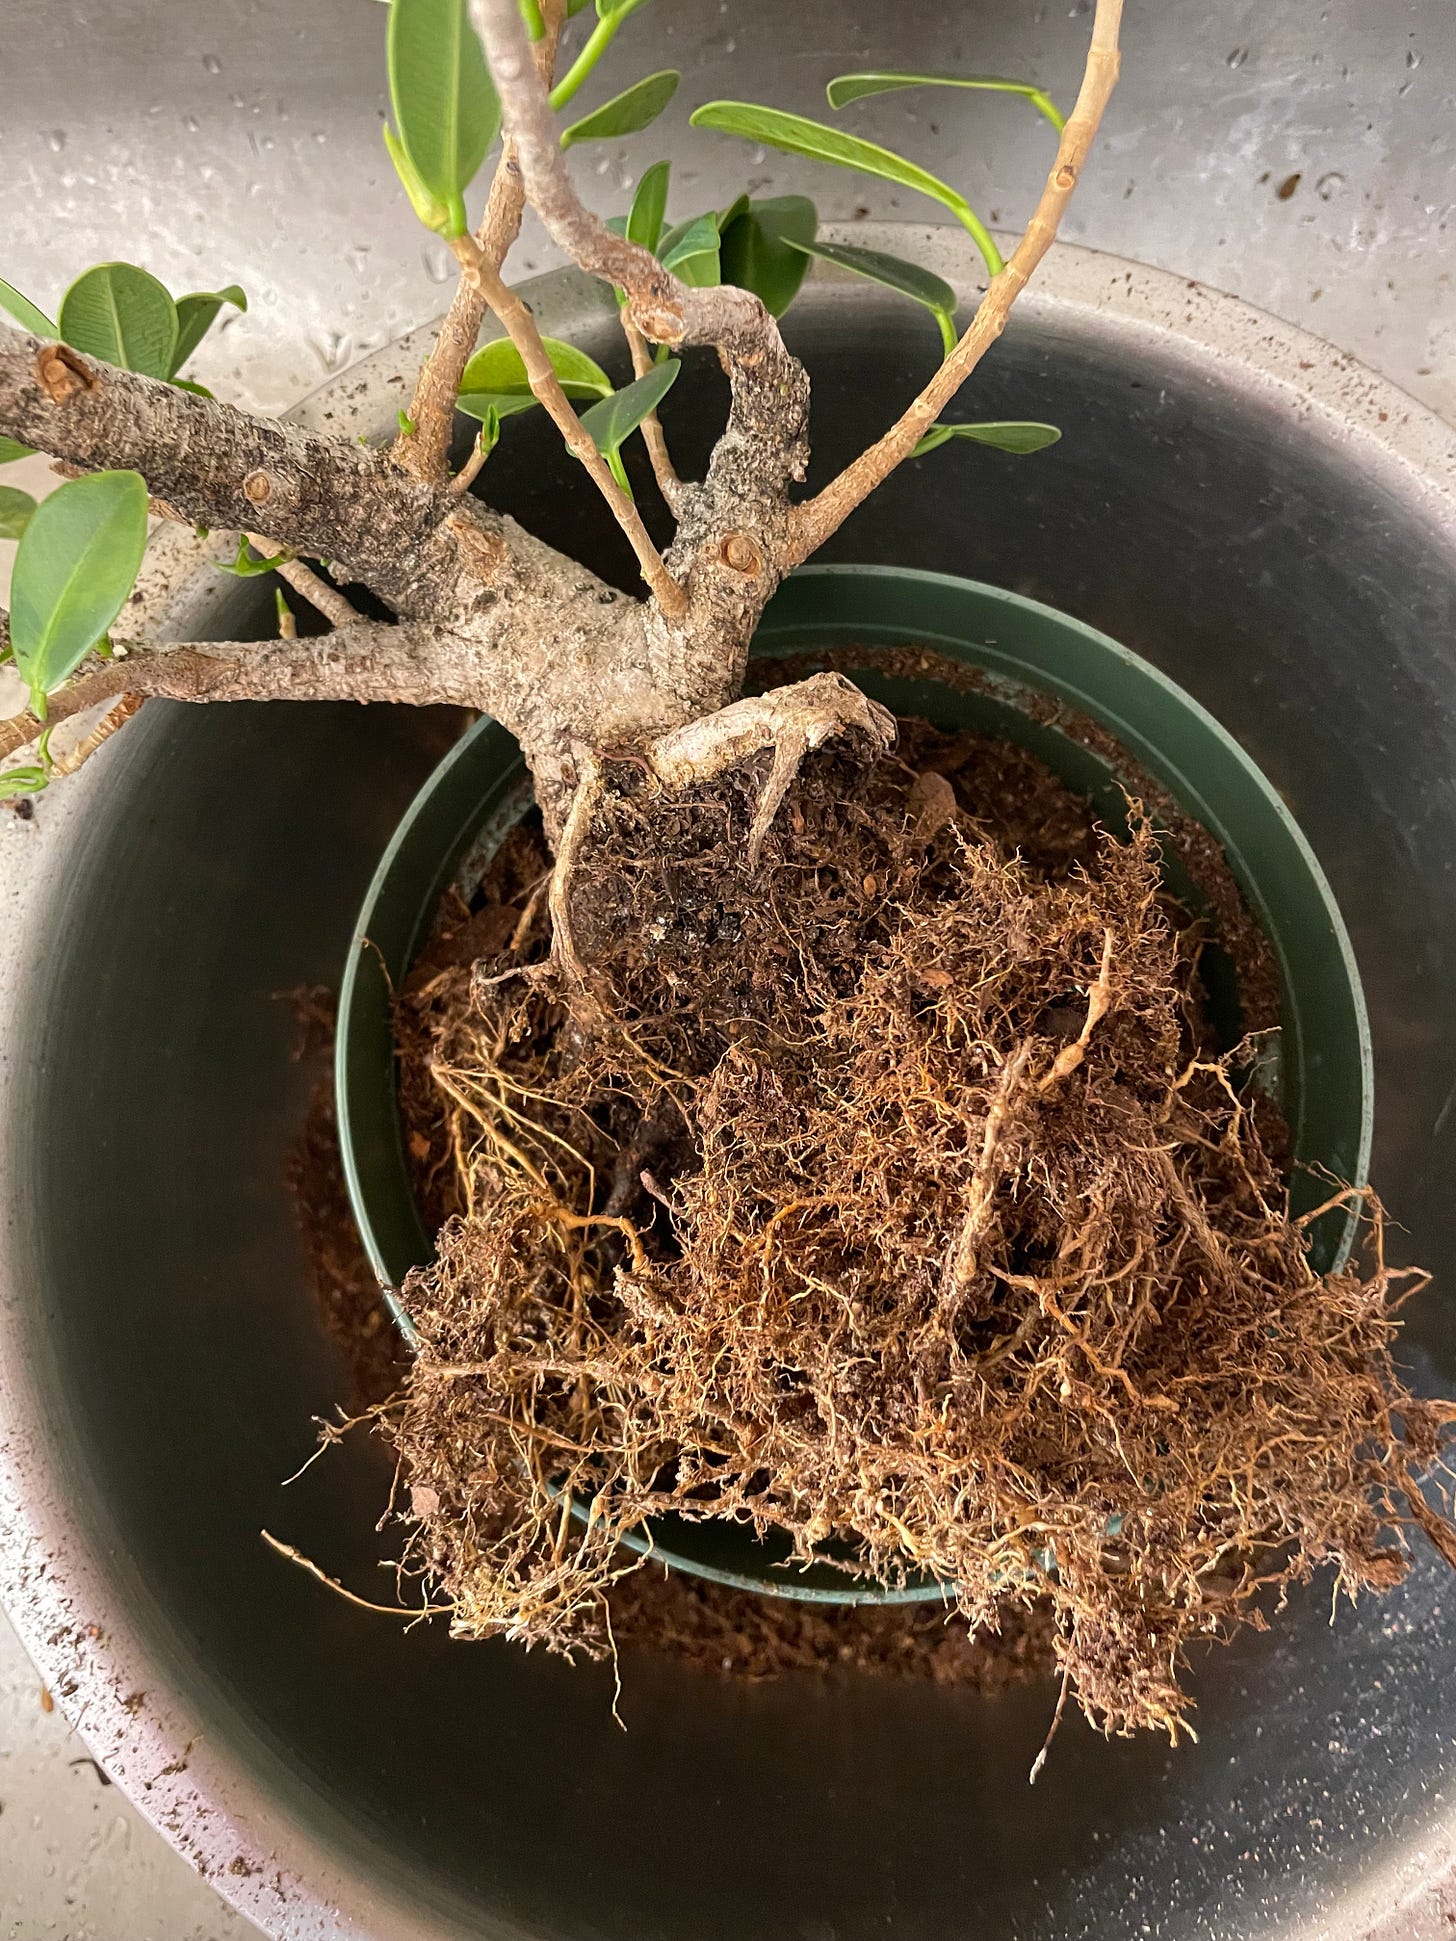 ID: Photo of a ficus pre bonsai bare rooted from its soil, exposing a dense and fibrous rootball, in a metal bowl in my kitchen sink.